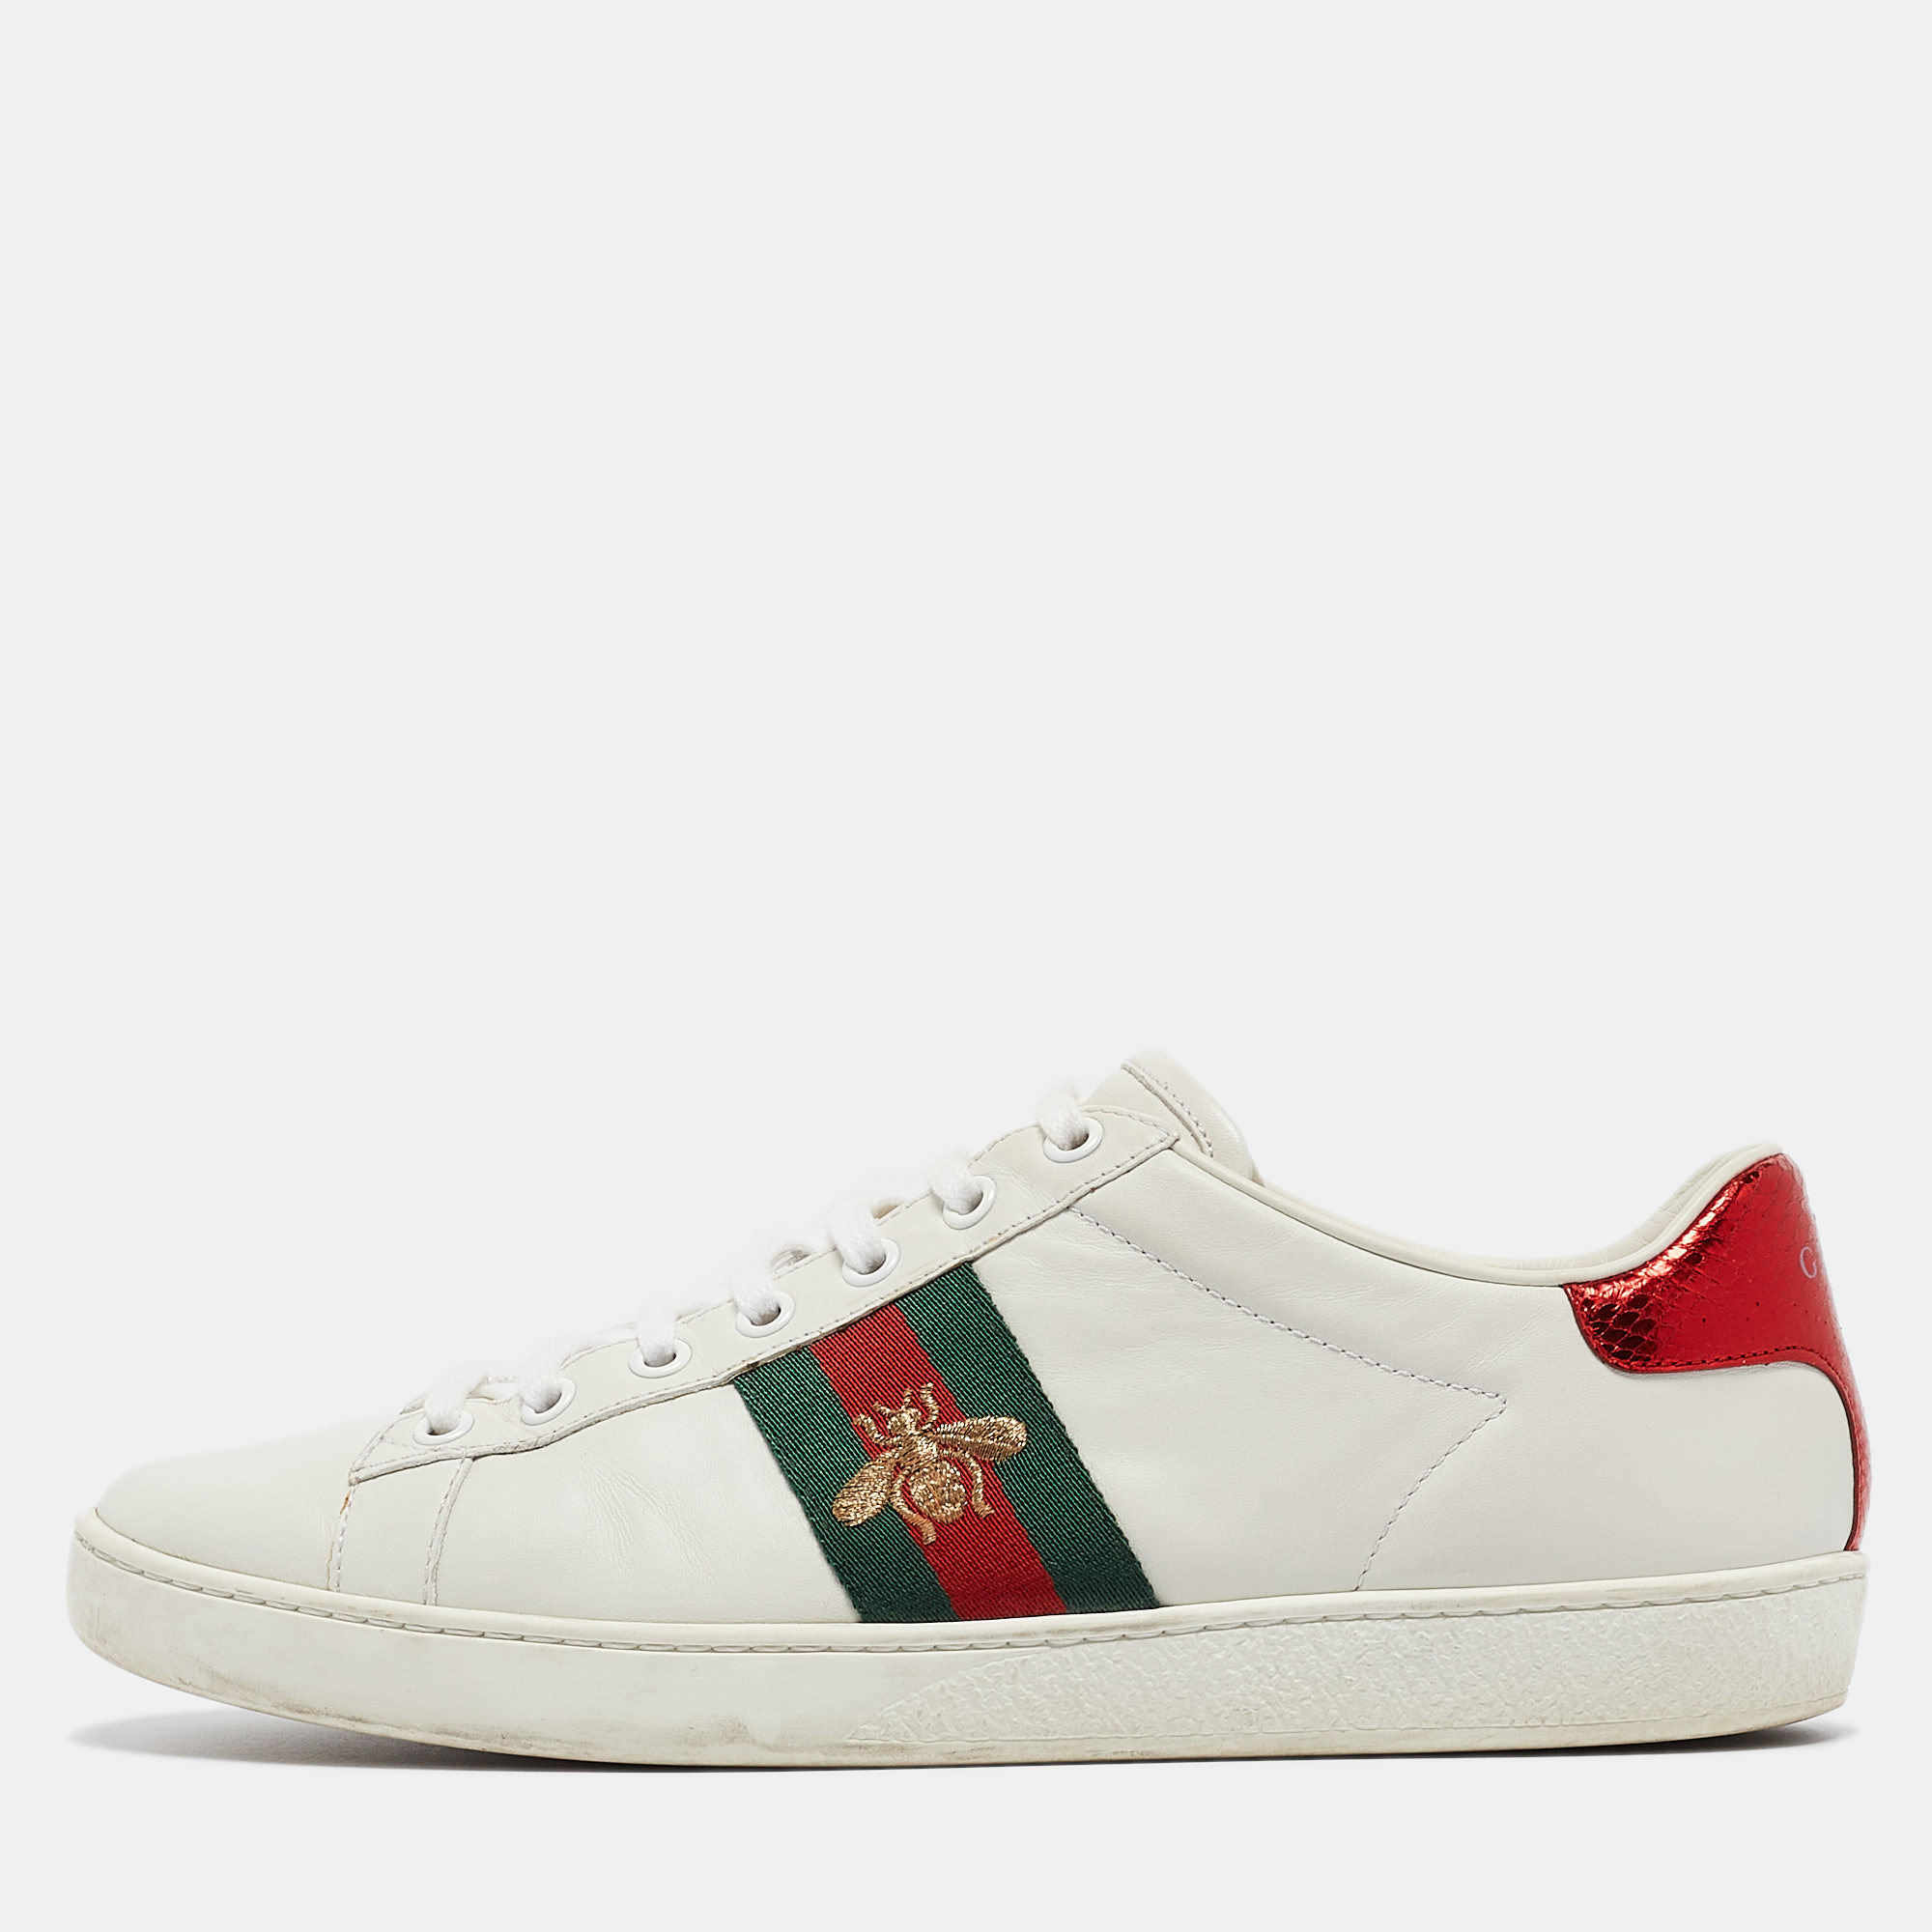 Gucci white leather bee embroidered ace sneakers size 38.5